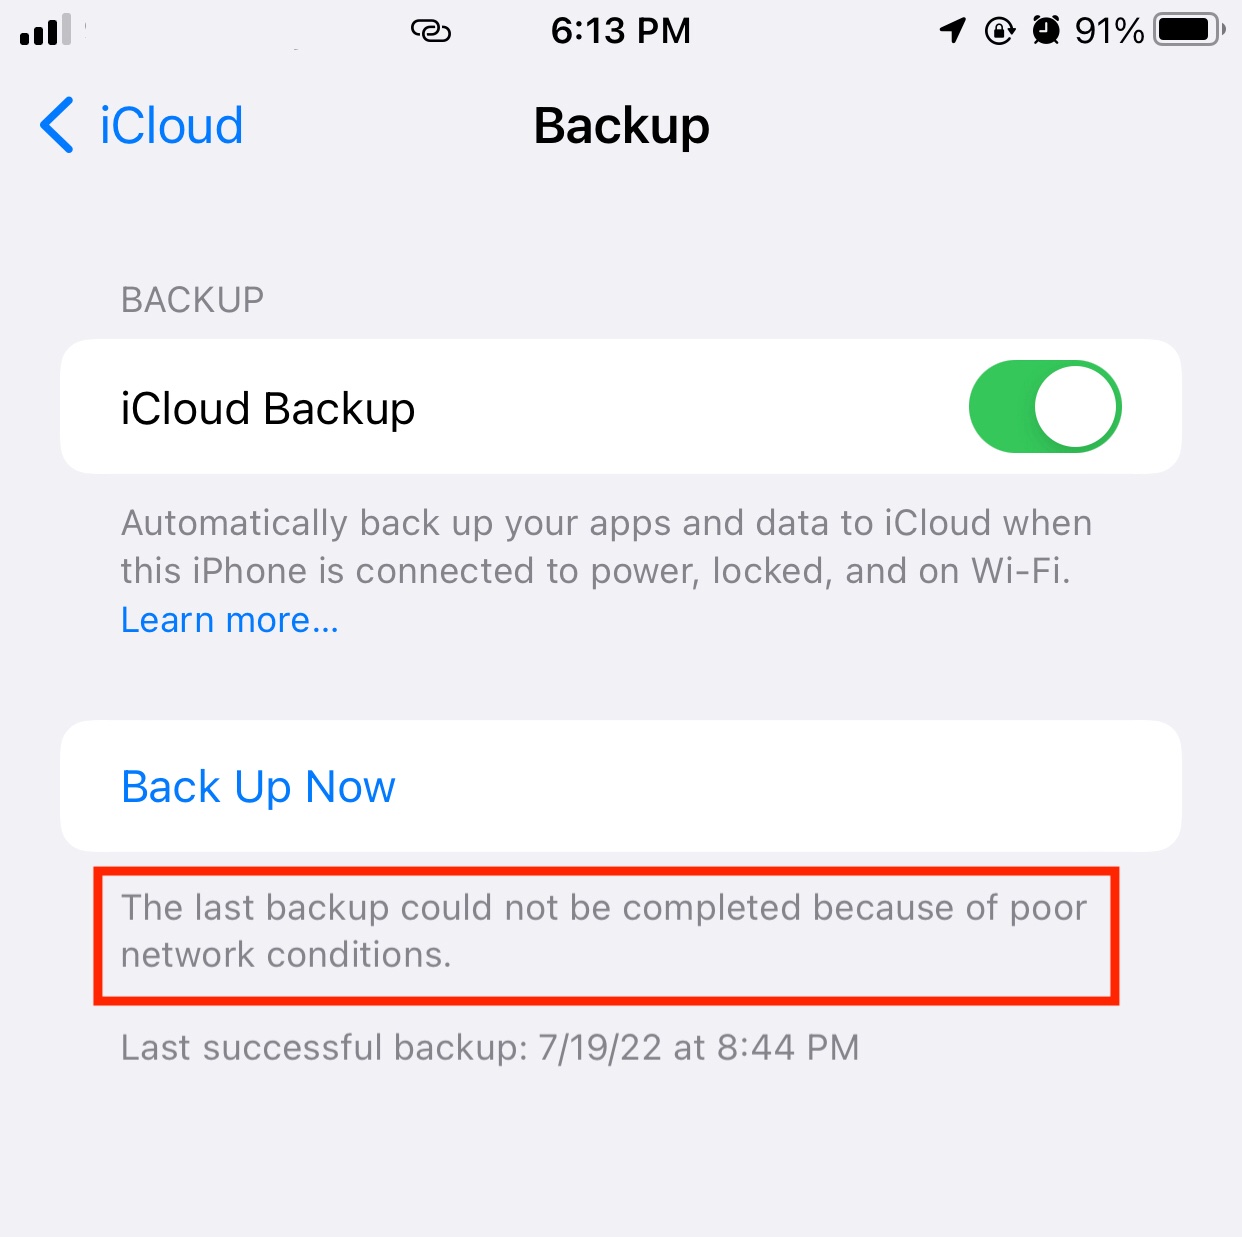 How To Fix ‘The Last Backup Could Not Be Completed’ Error